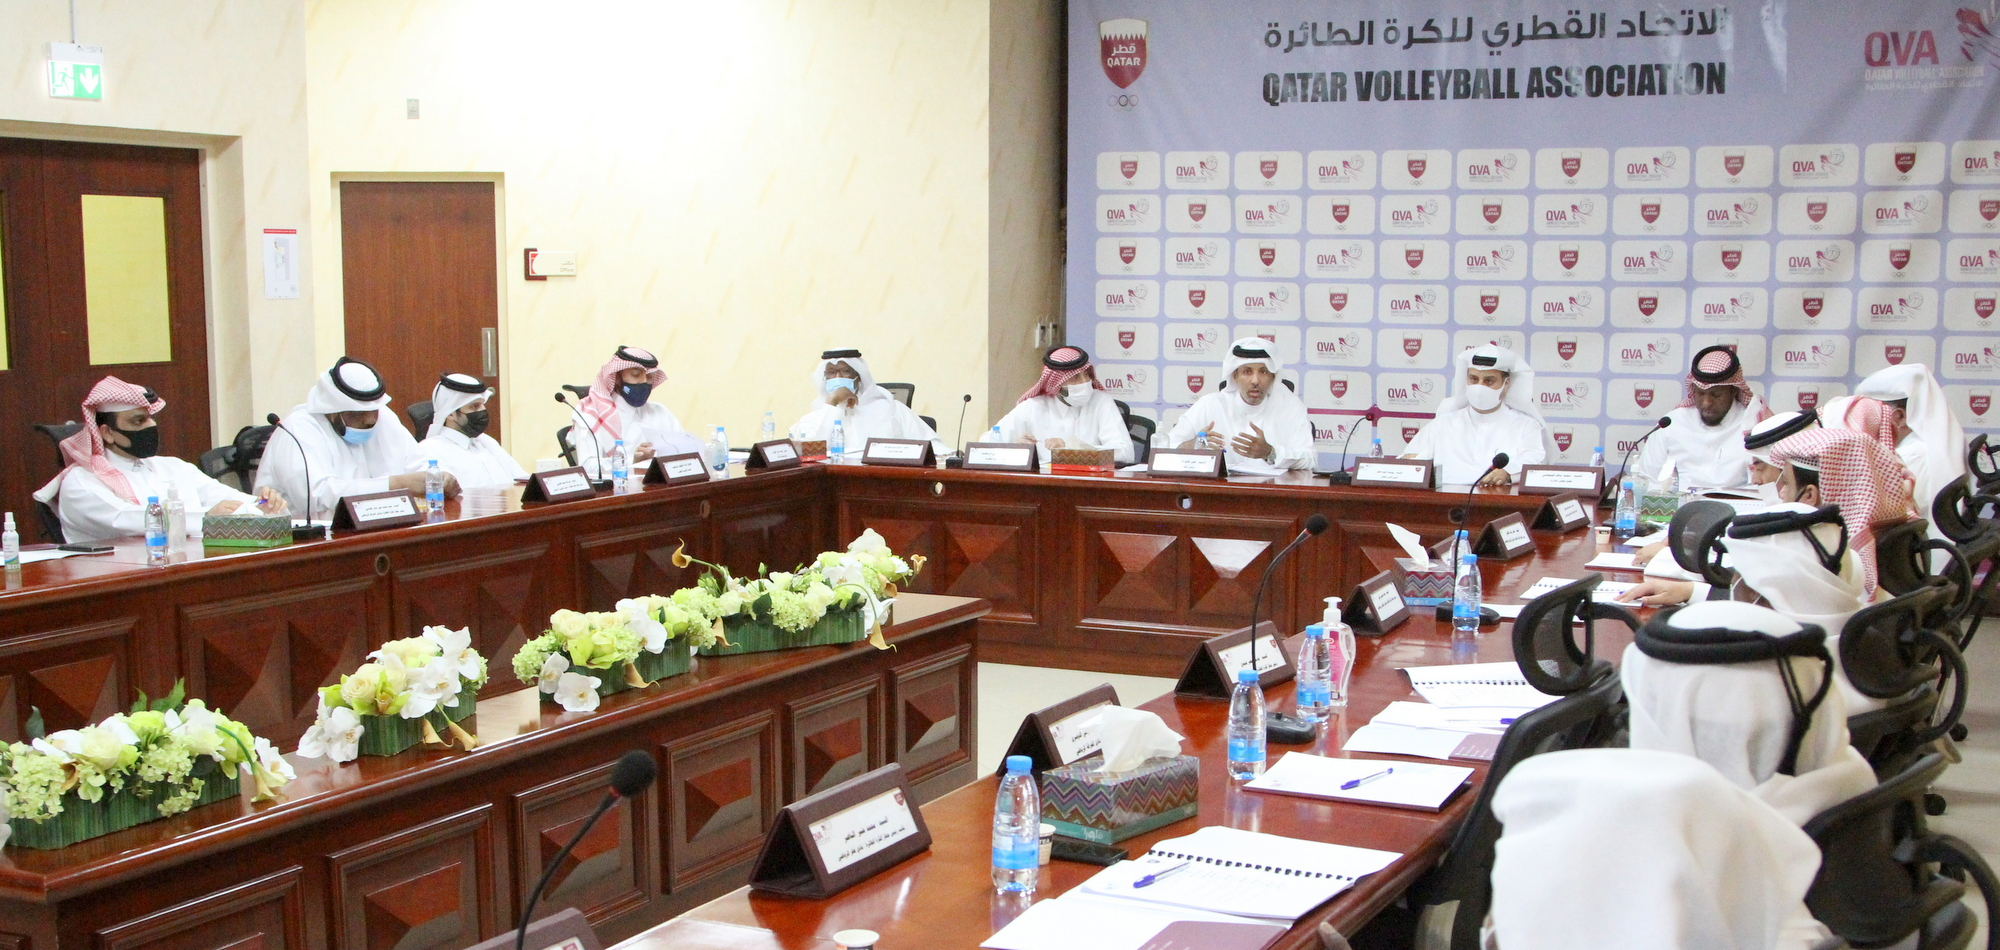 Conducting the Ordinary General Assembly for the 2020/2021 sports season